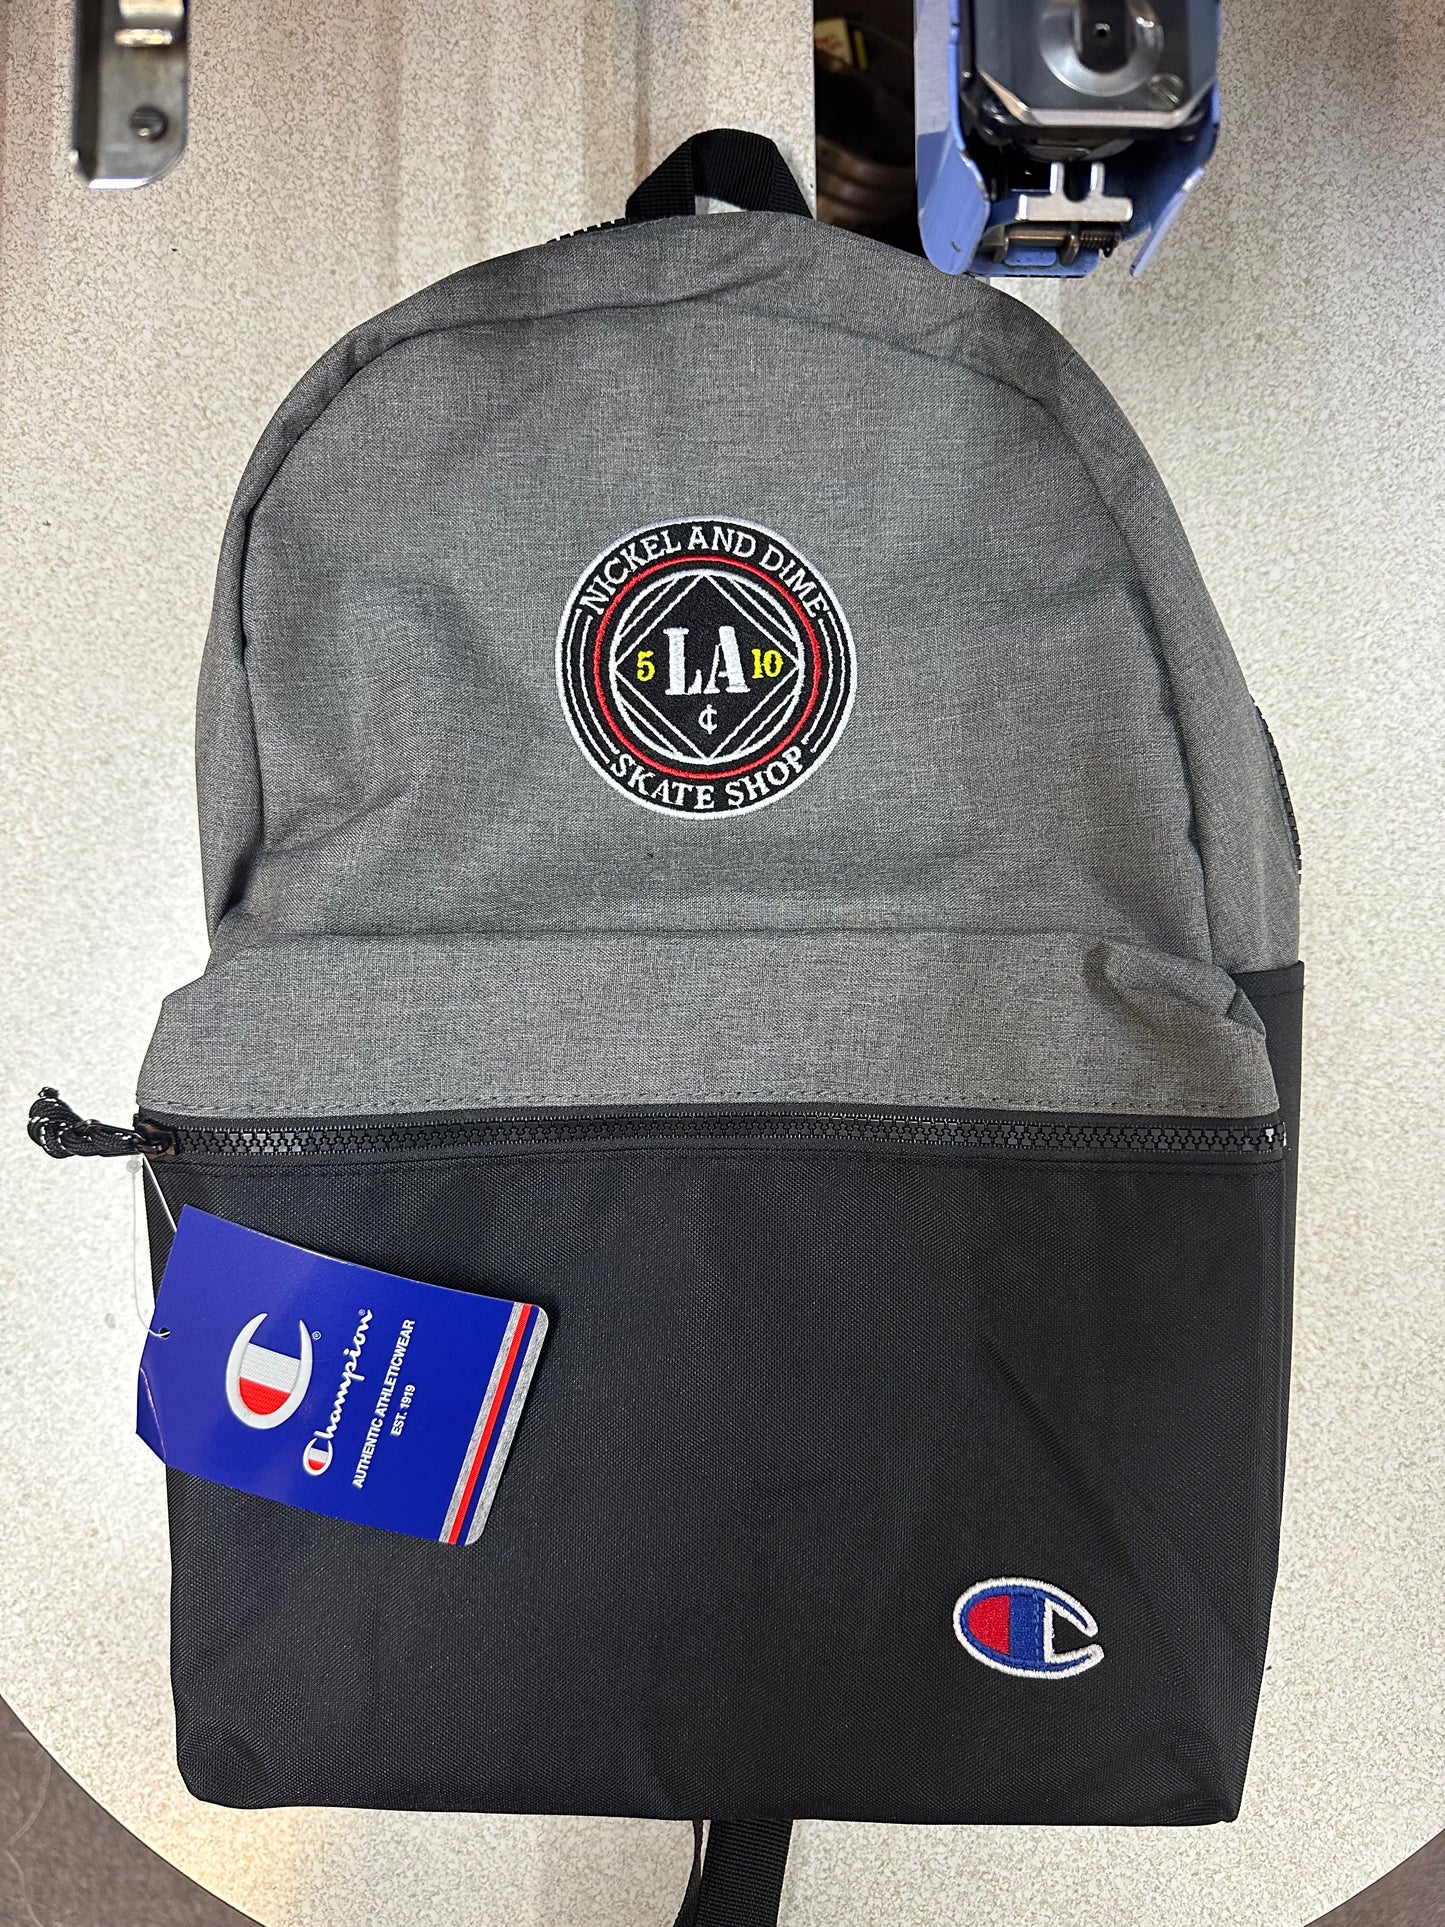 Nickel and Dime skate shop x Champion Back pack